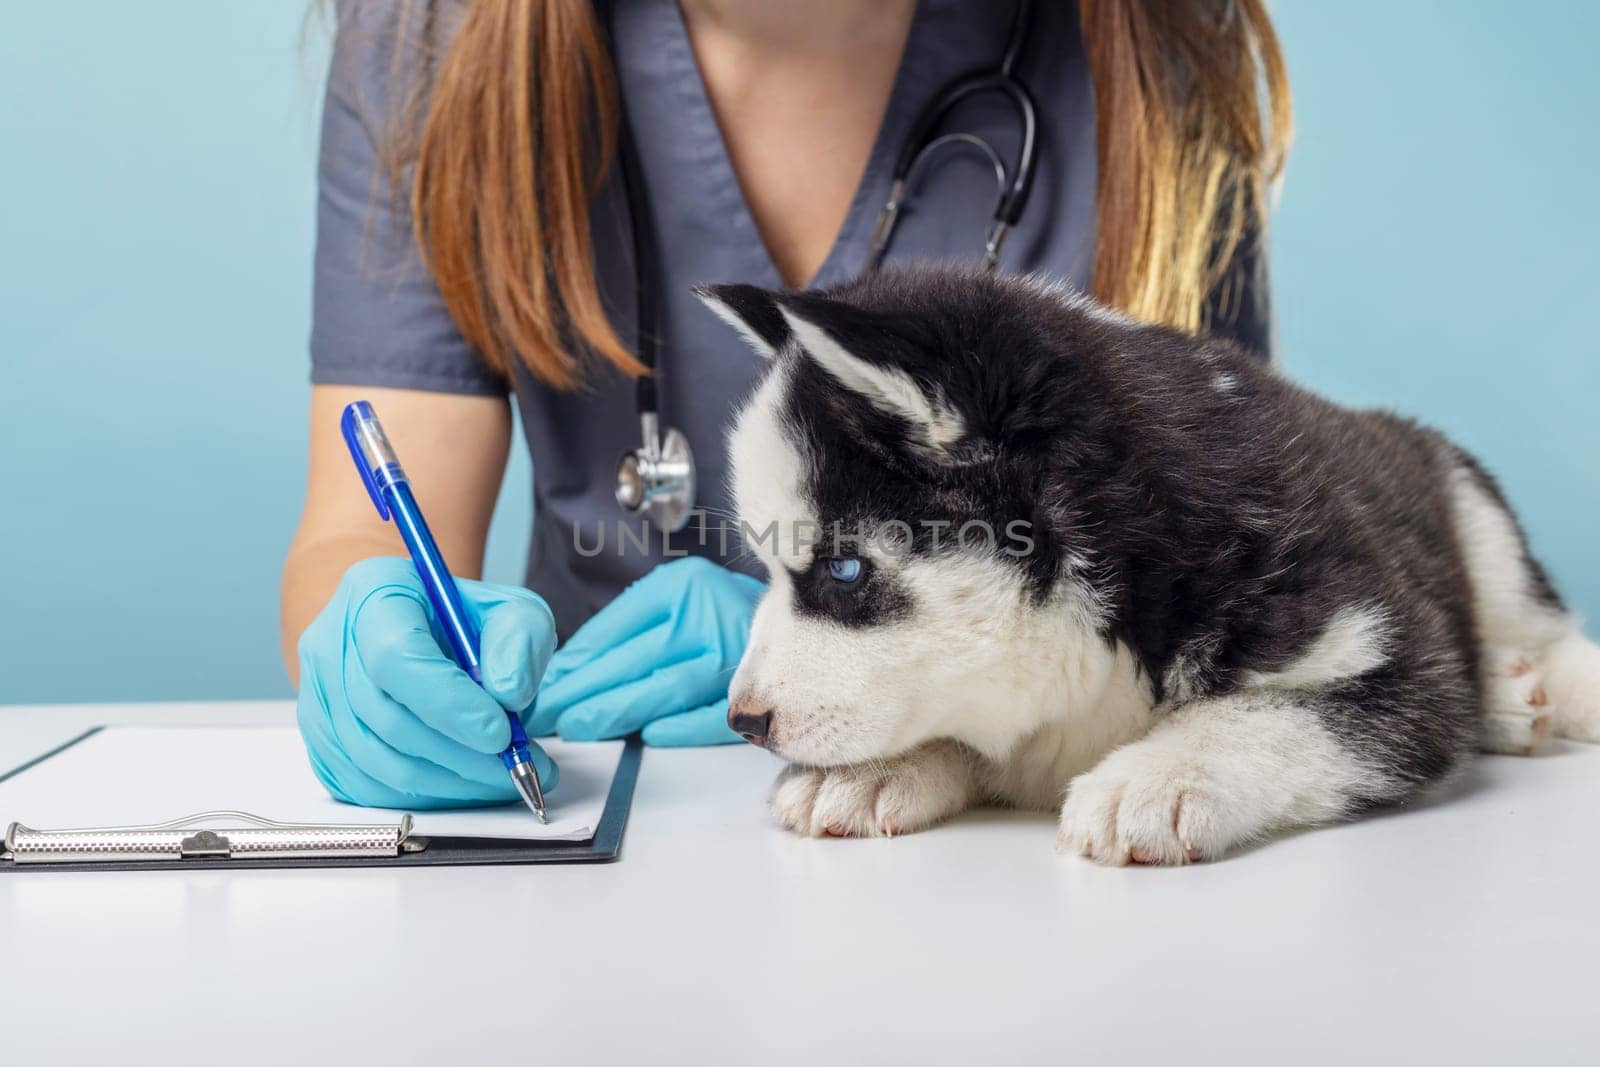 Puppy being examined by veterinarian with stethoscope. Animal healthcare concept. Studio shot with turquoise background. Design for educational material, banner, flyer.